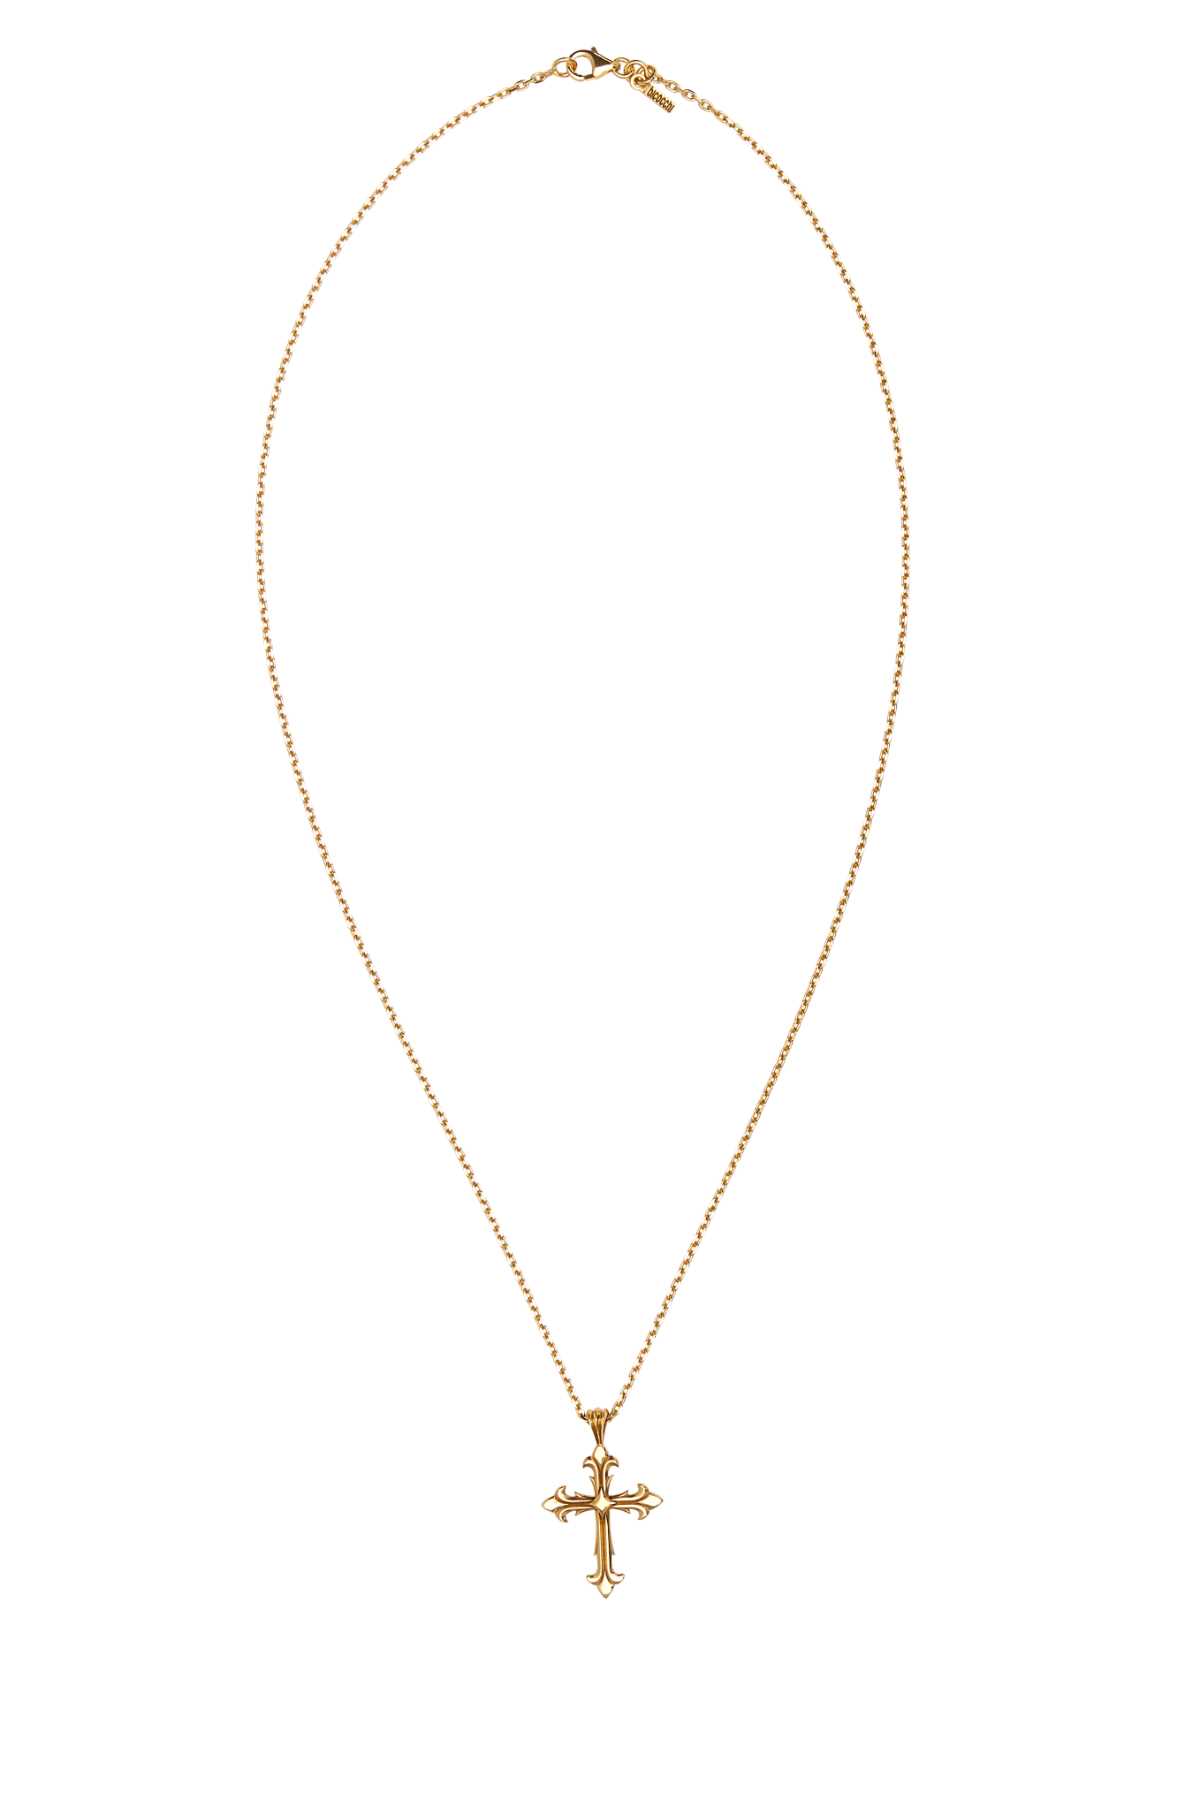 Gold 925 Silver Fleury Cross Necklace